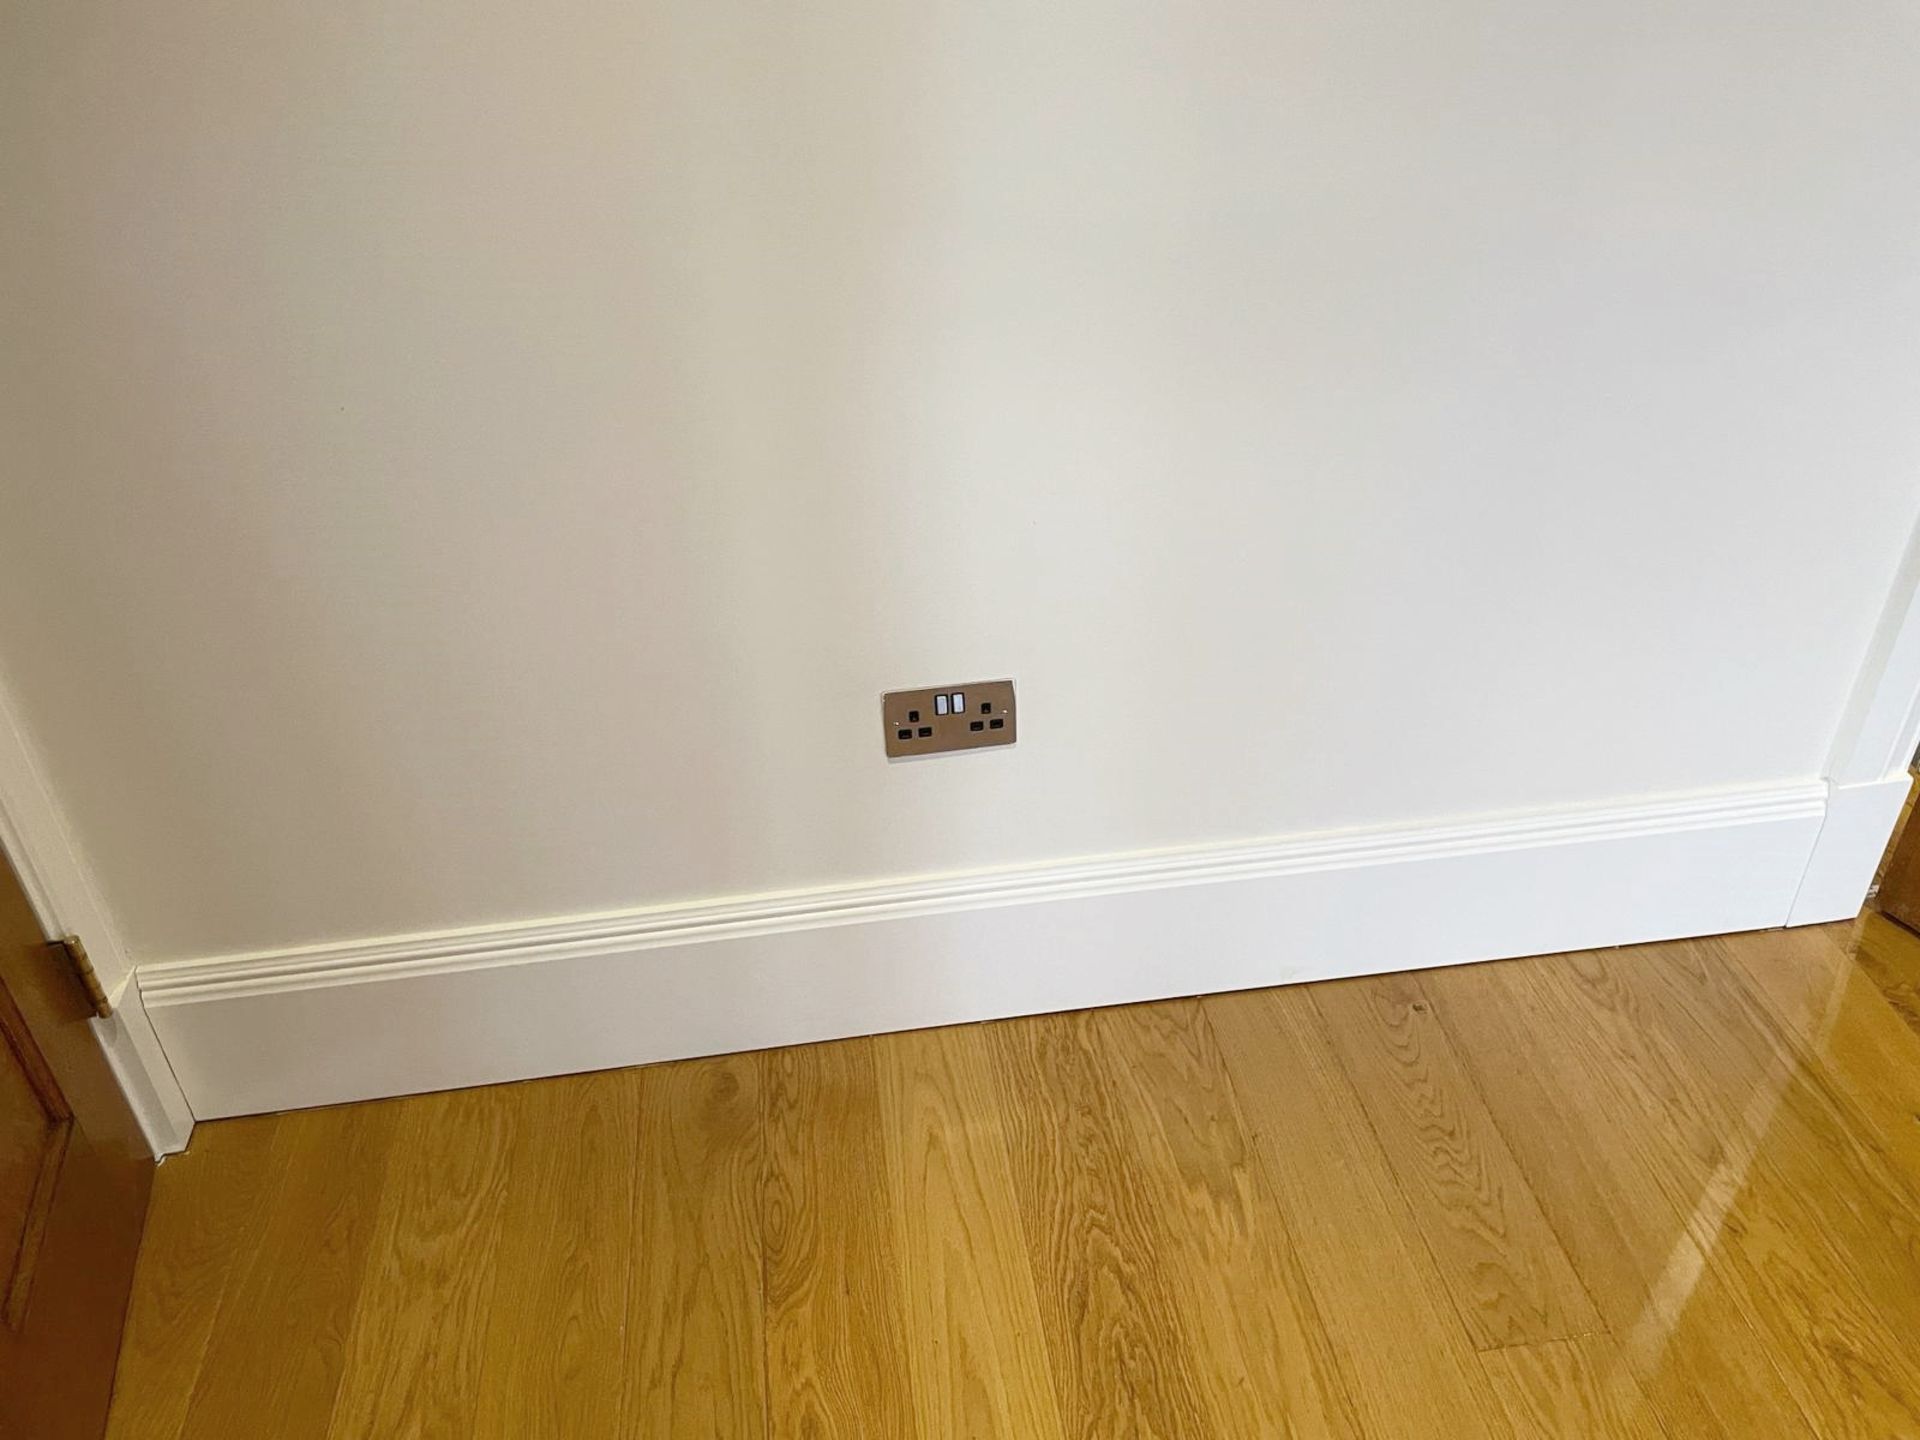 Approximately 17-metres of Timber Painted Skirting Boards in White, Height 23cm - Ref: PAN177 - Image 4 of 8